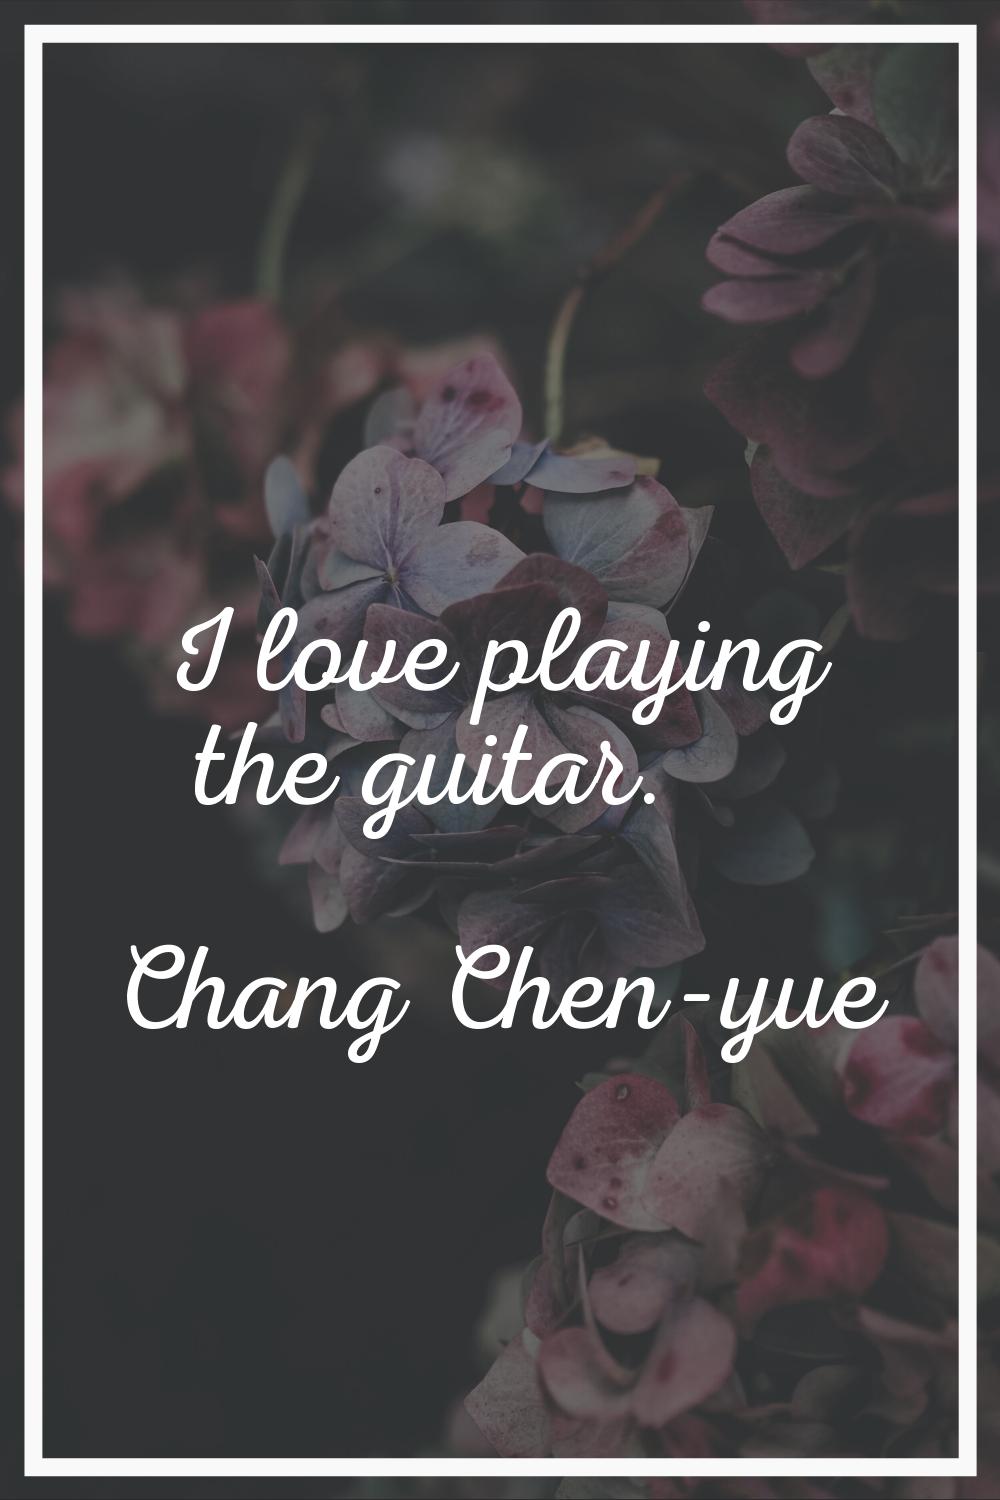 I love playing the guitar.